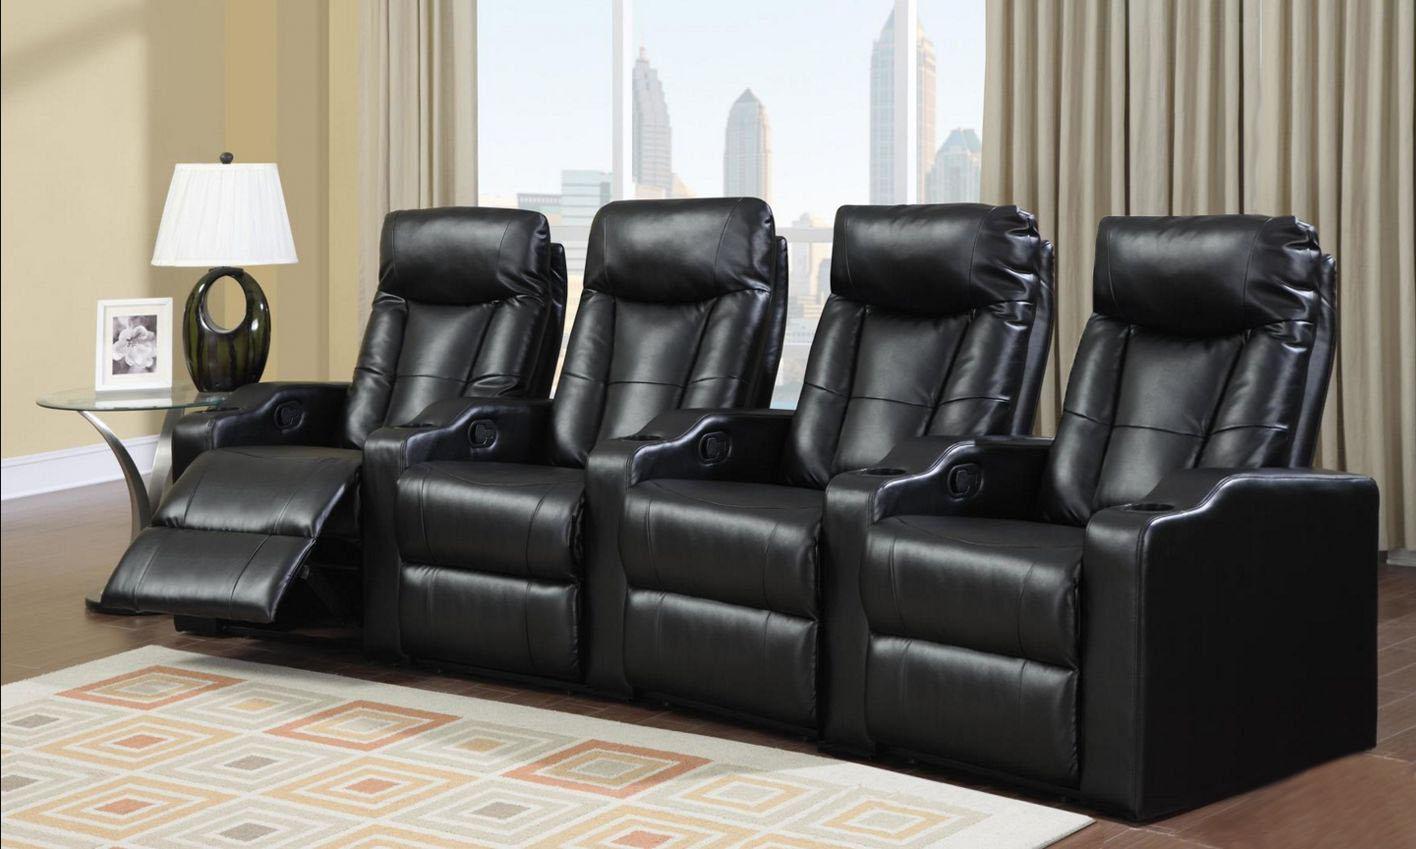 

    
Black Bonded Leather Reclining Home Theater Seating Row of 4 Seats w Cupholders
